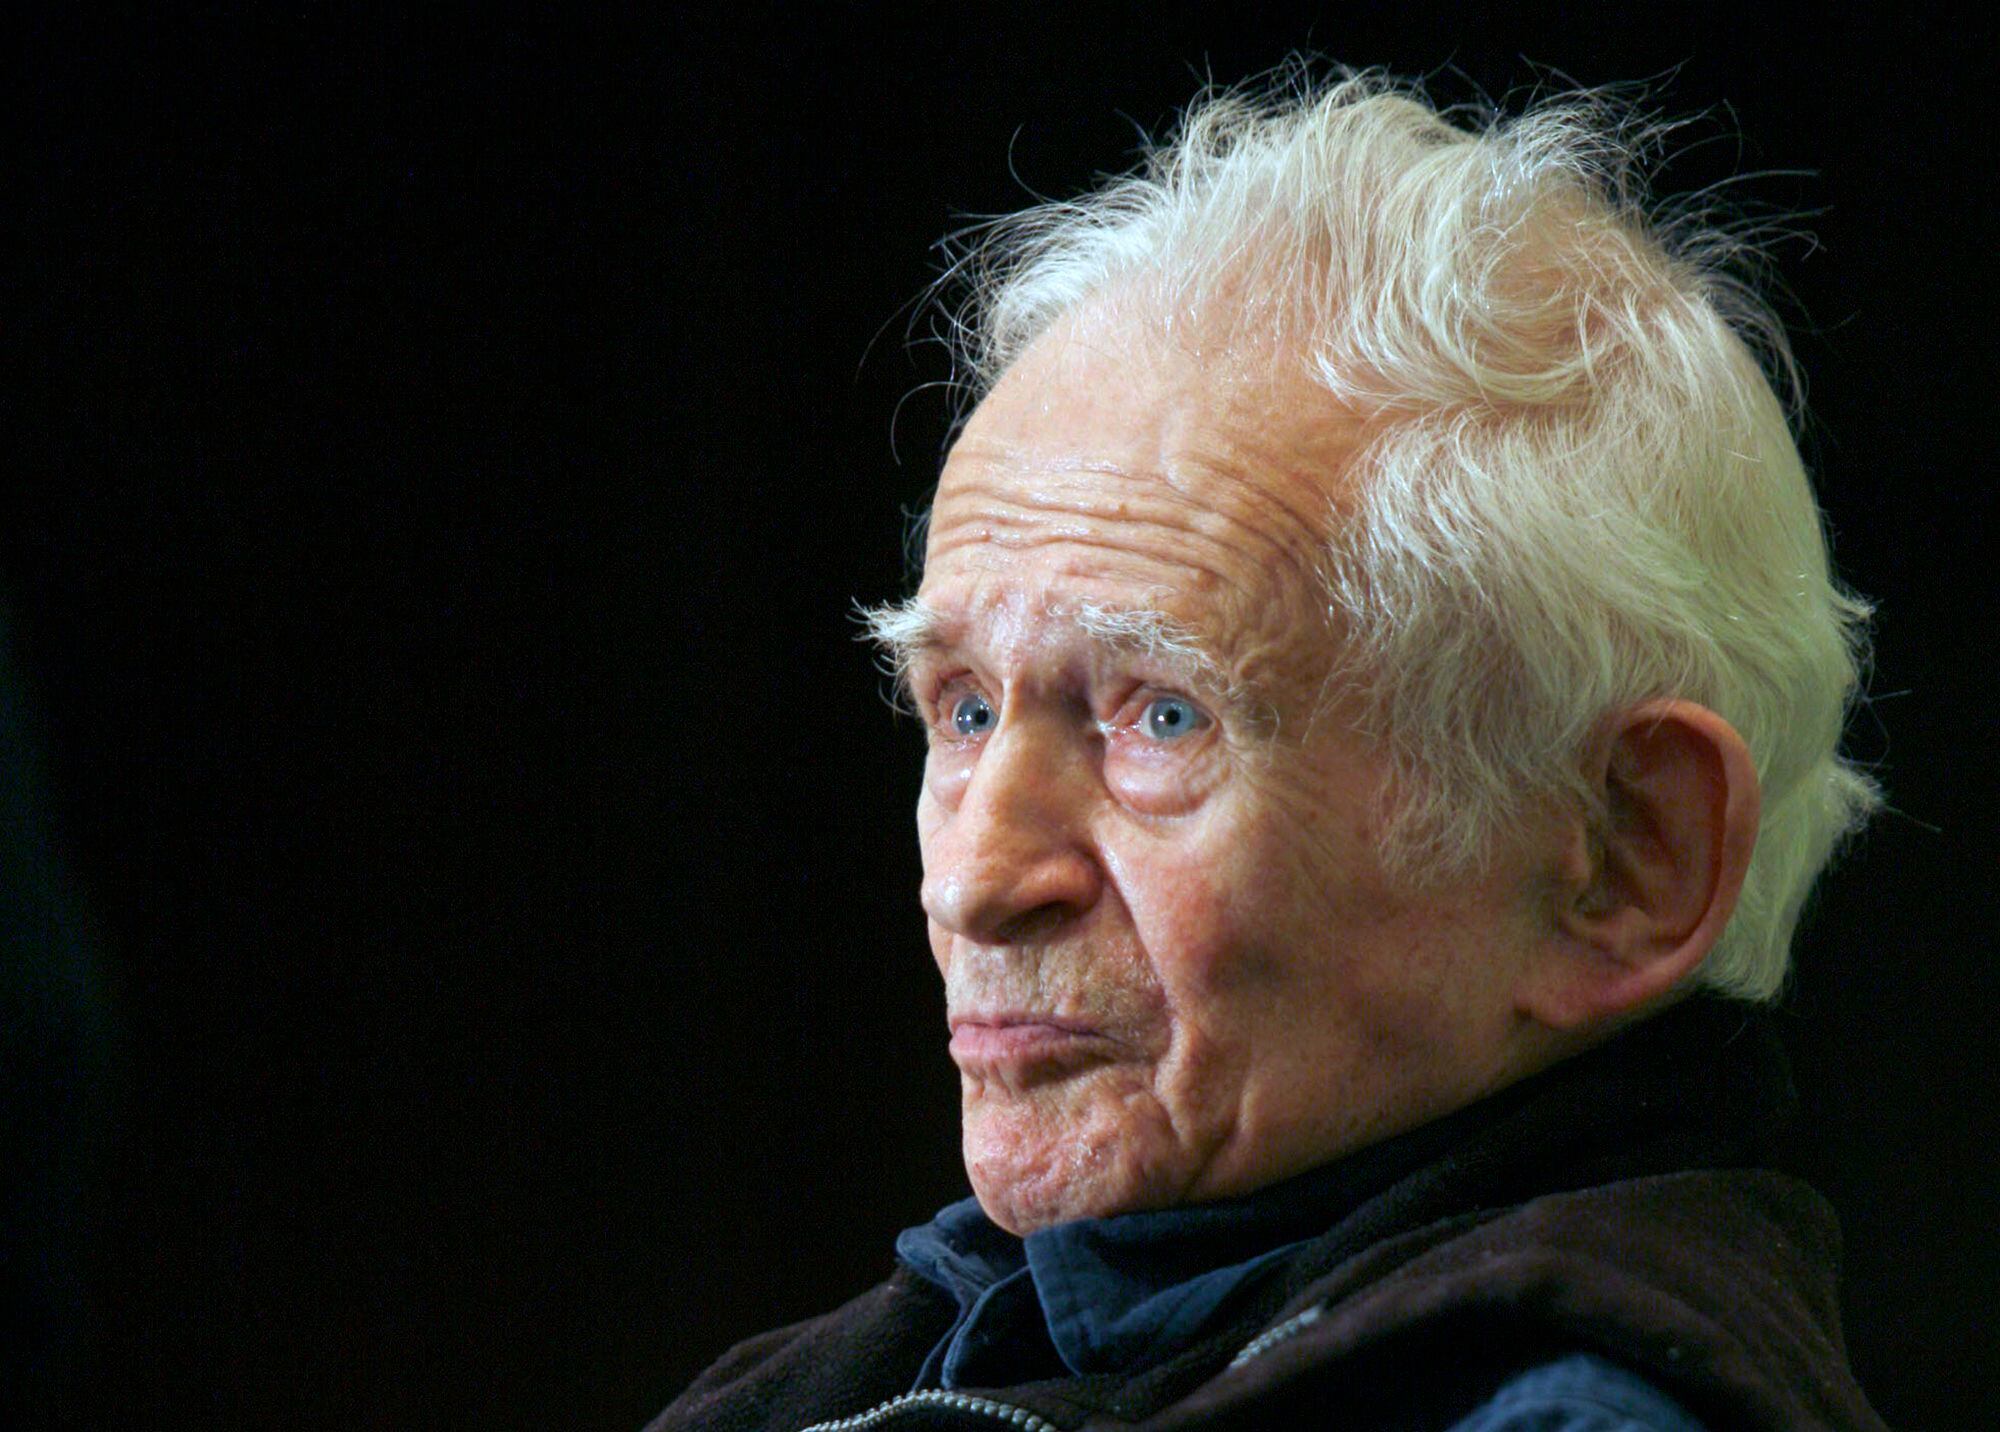 Collection of Norman Mailer’s writing finds new publisher